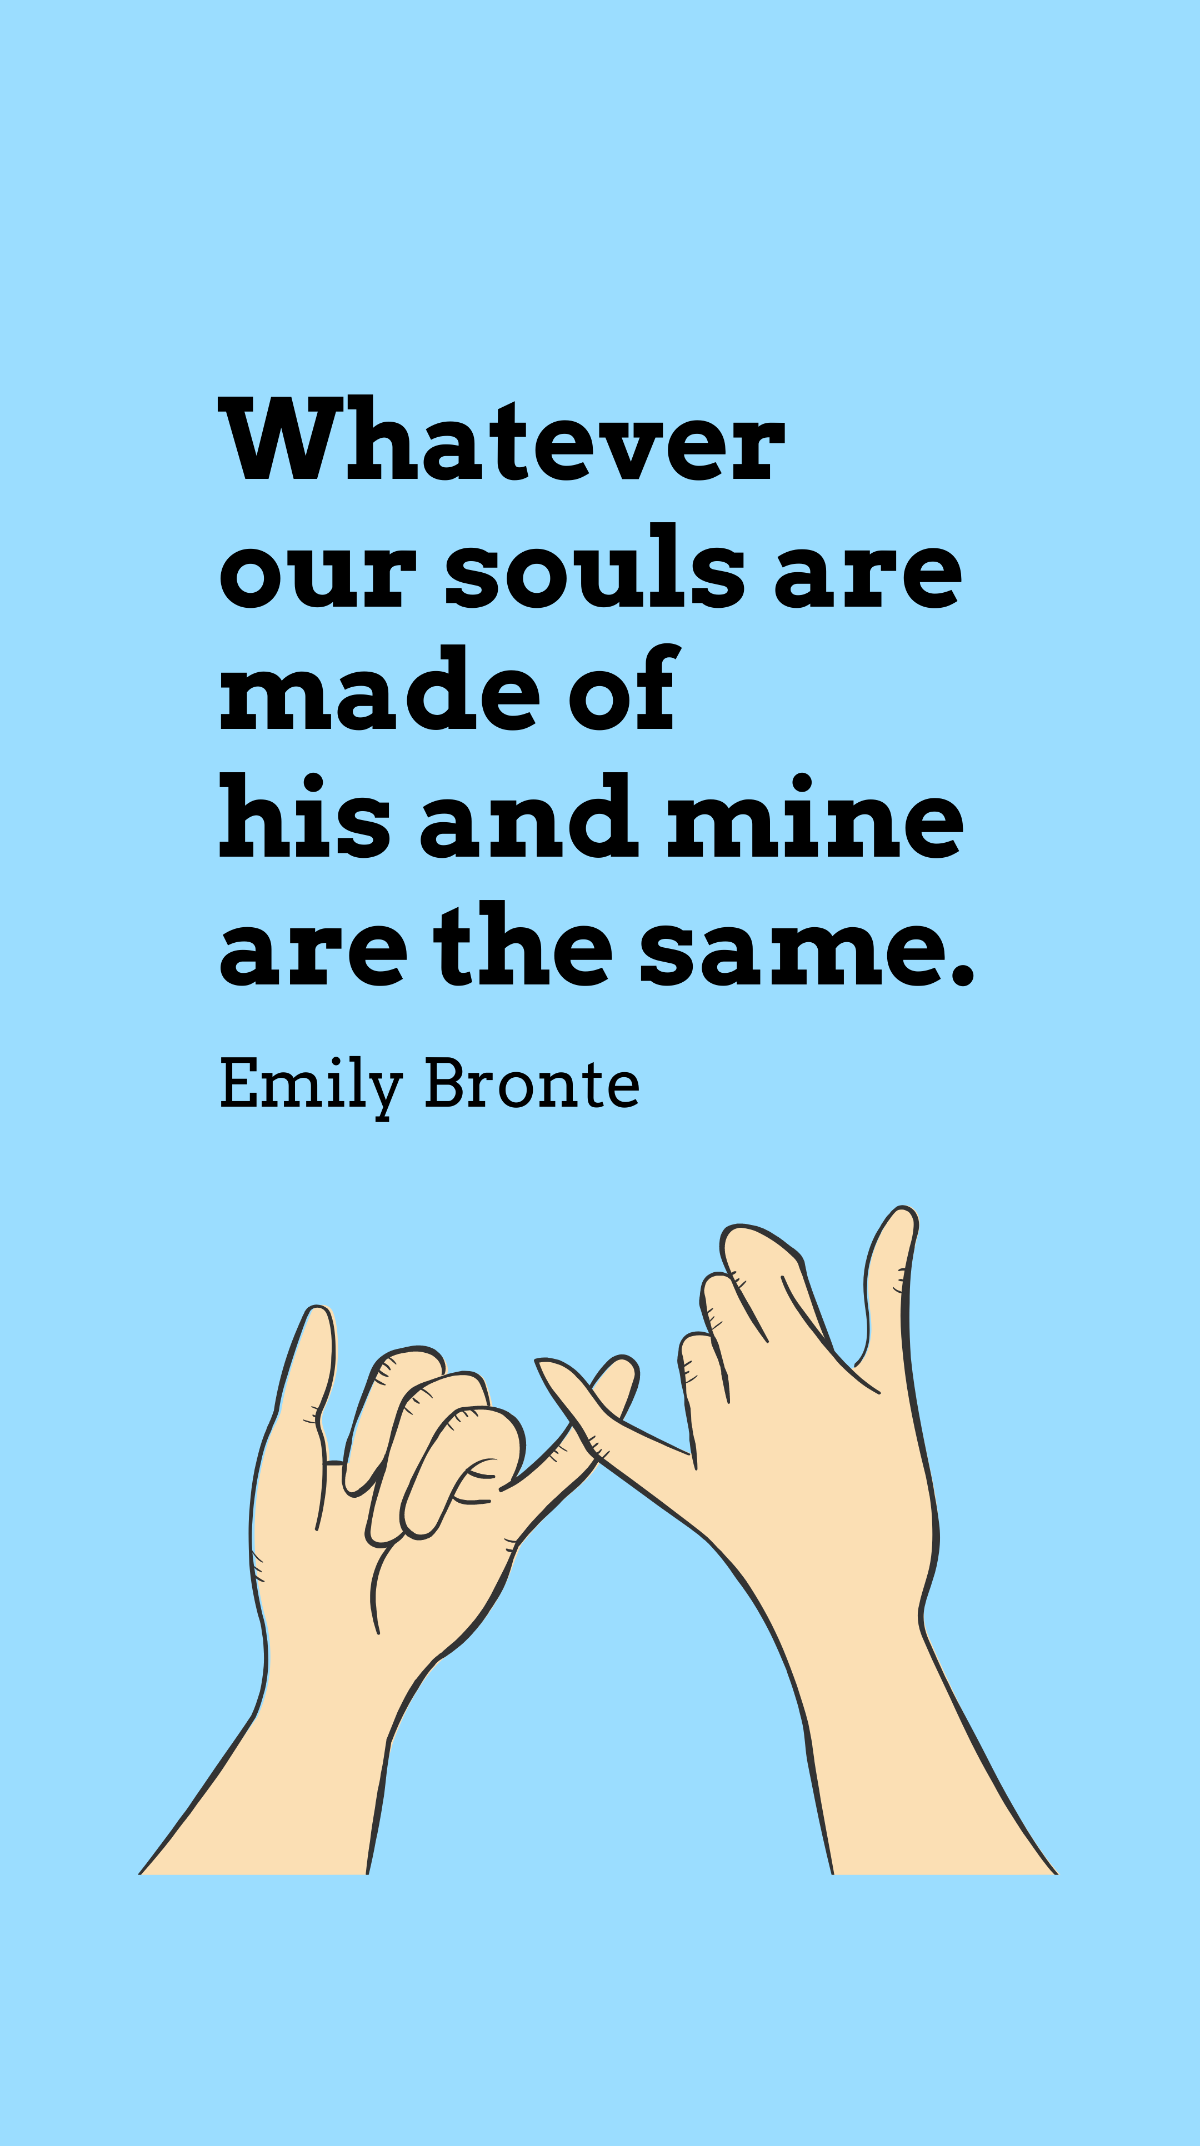 Emily Bronte - Whatever our souls are made of his and mine are the same. Template